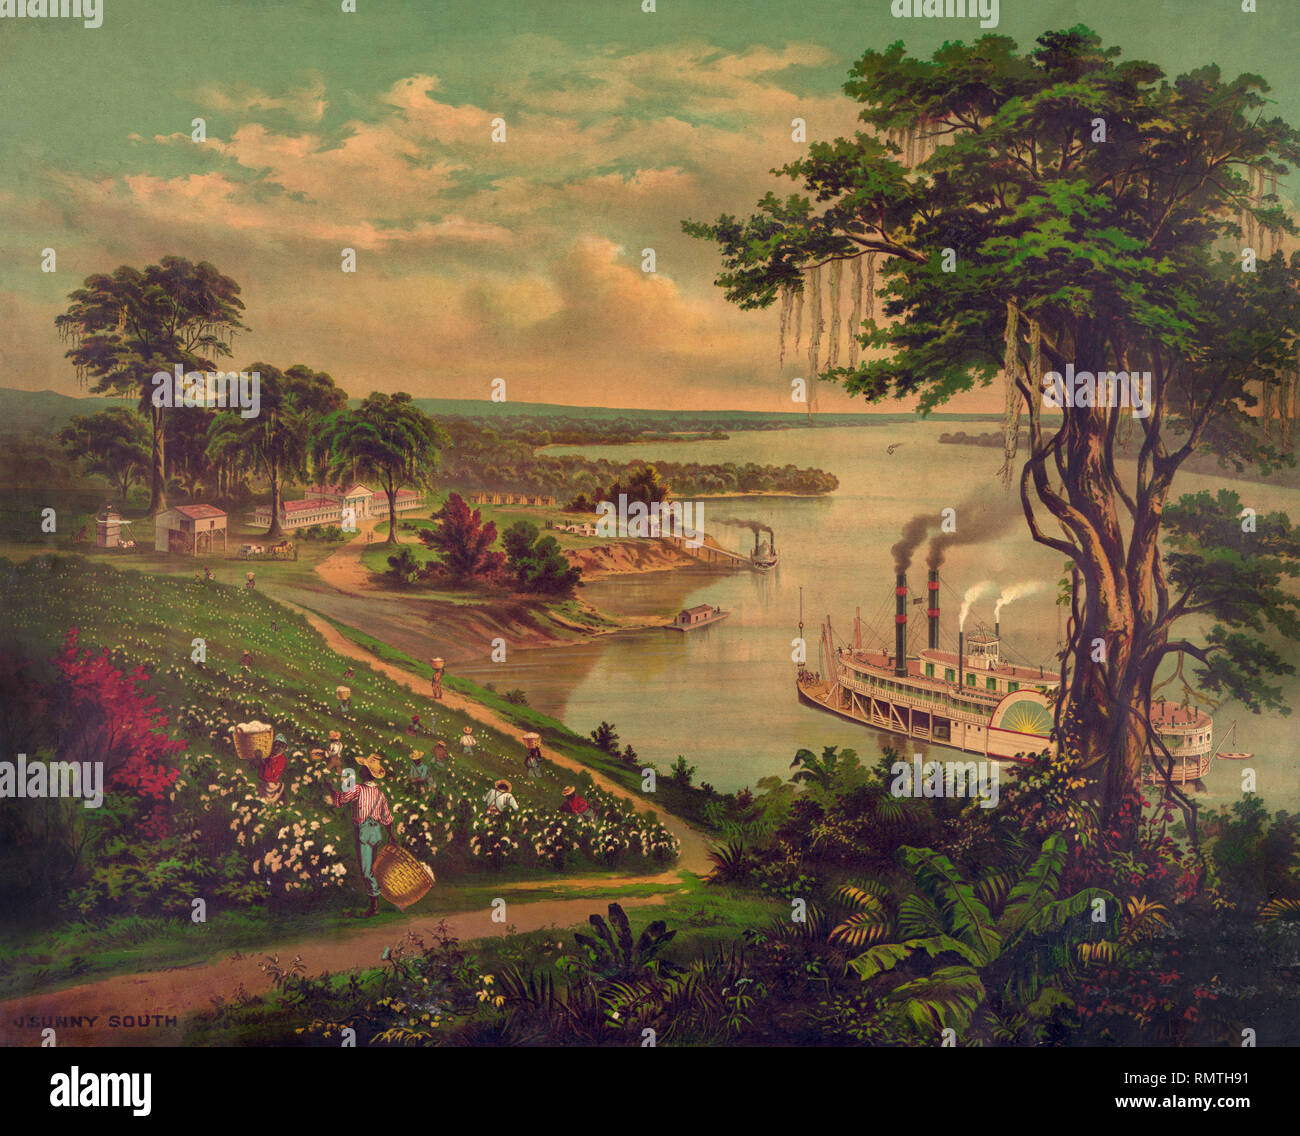 'Sunny South', African Americans Picking Cotton, Riverboat on River, Plantation House in Background, Lower Mississippi River, Lithograph, 1883 Stock Photo